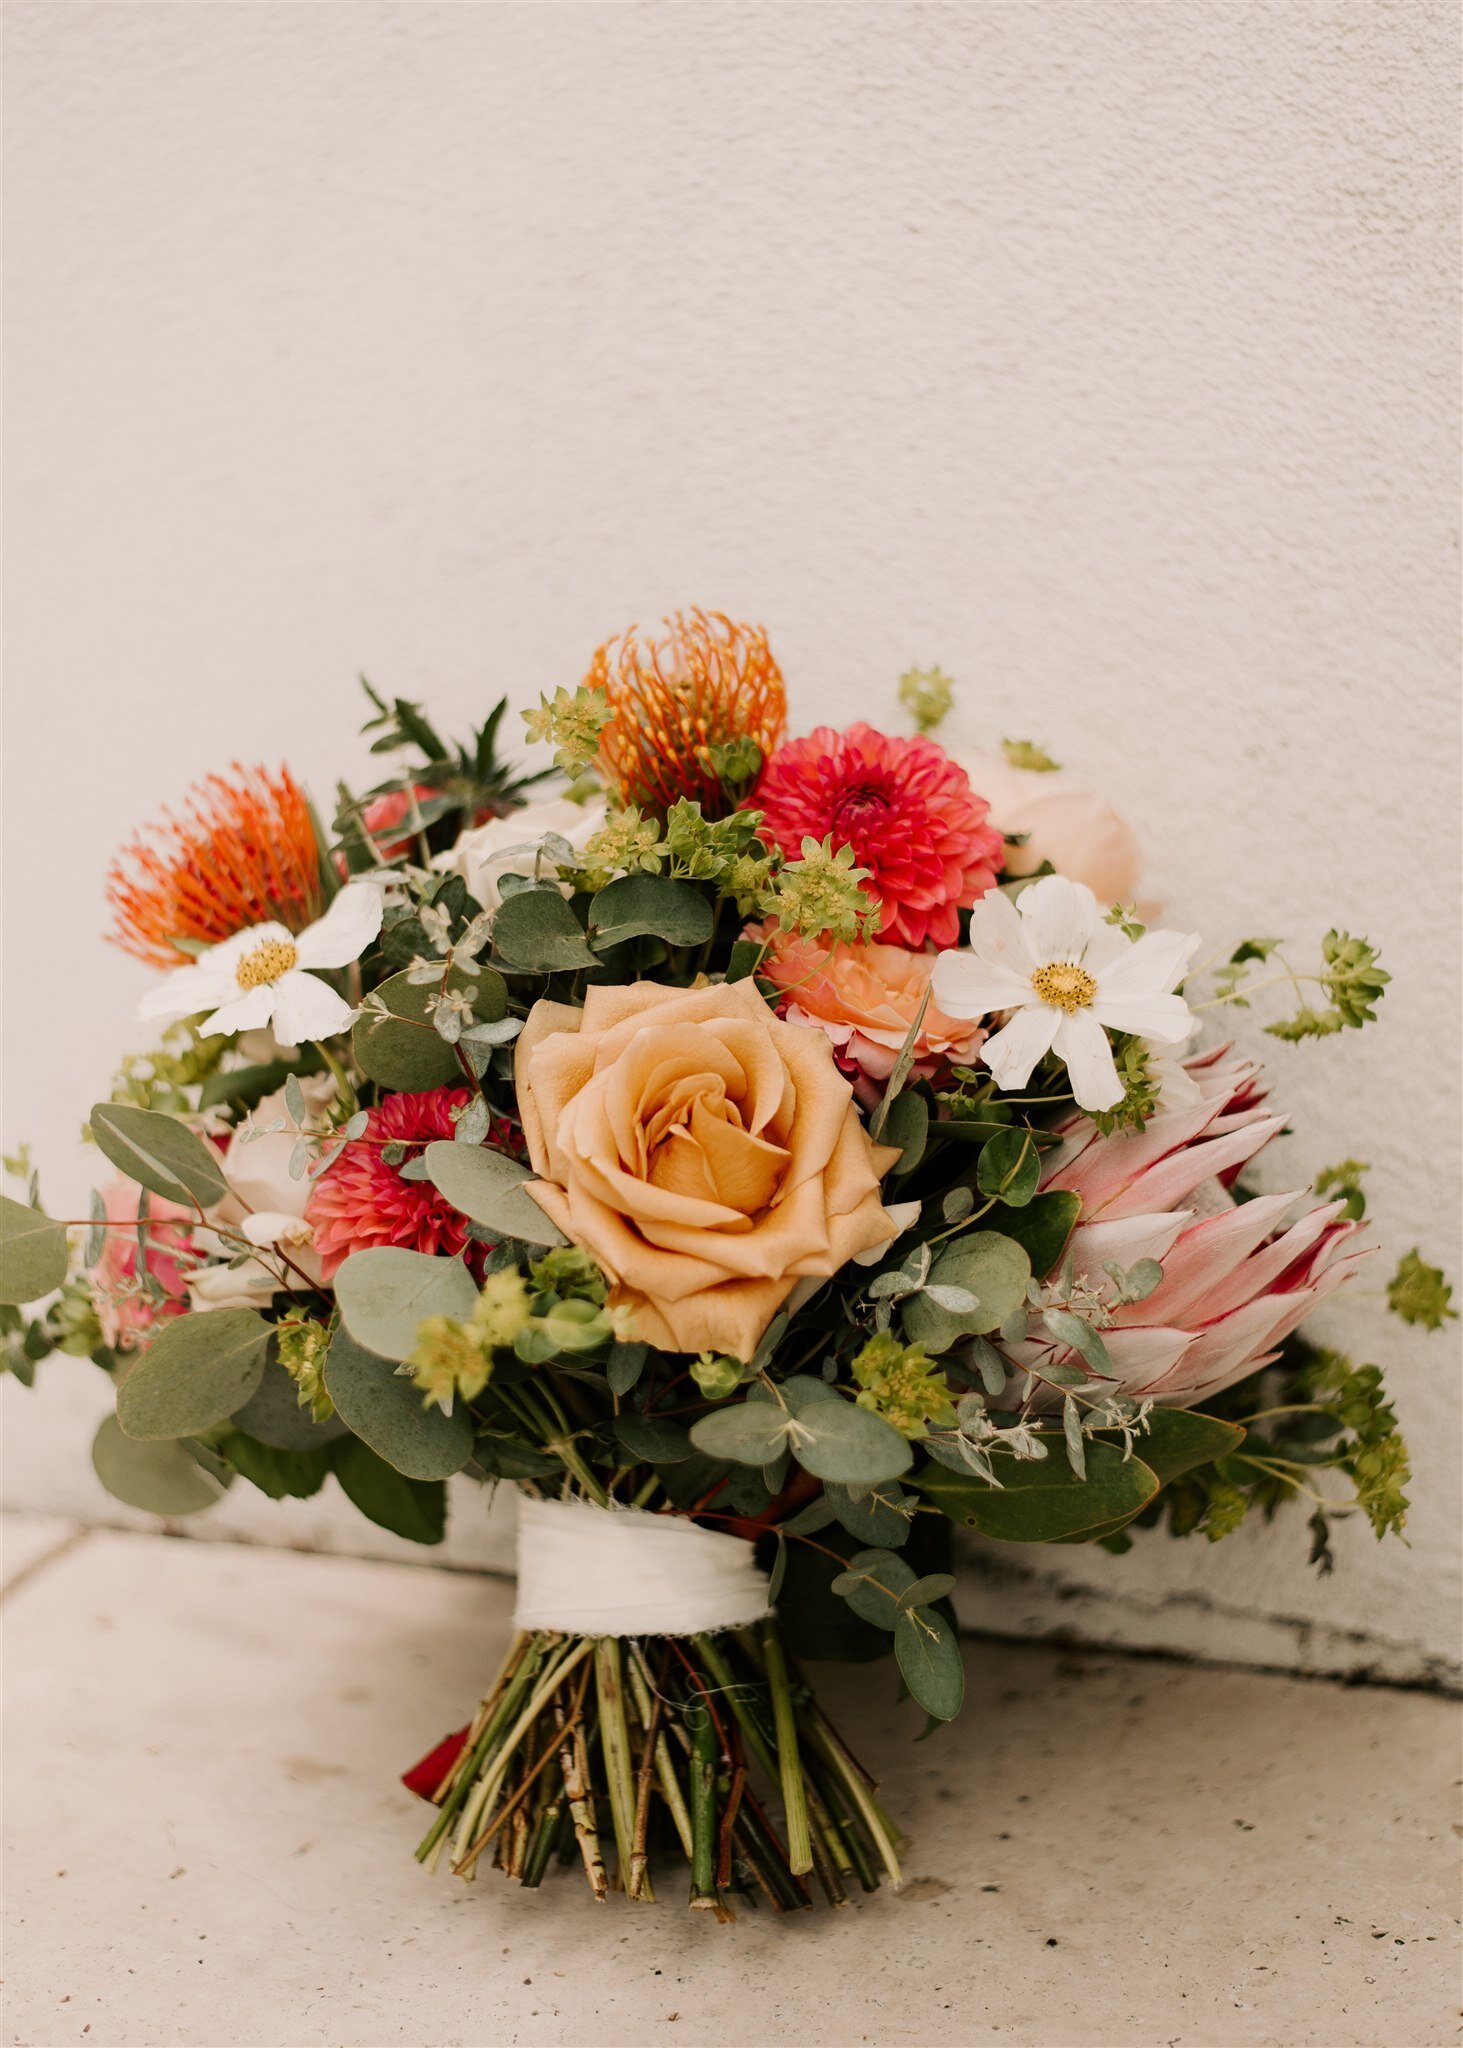 ivory-and-beau-wedding-and-florals-real-wedding-wedding-flowers-wedding-florals-savannah-florist-wedding-florist-floral-design-floral-designer-savannah-wedding-southern-wedding-bright-flowers-colorful-wedding-garden-wedding-DSC_3783.jpg